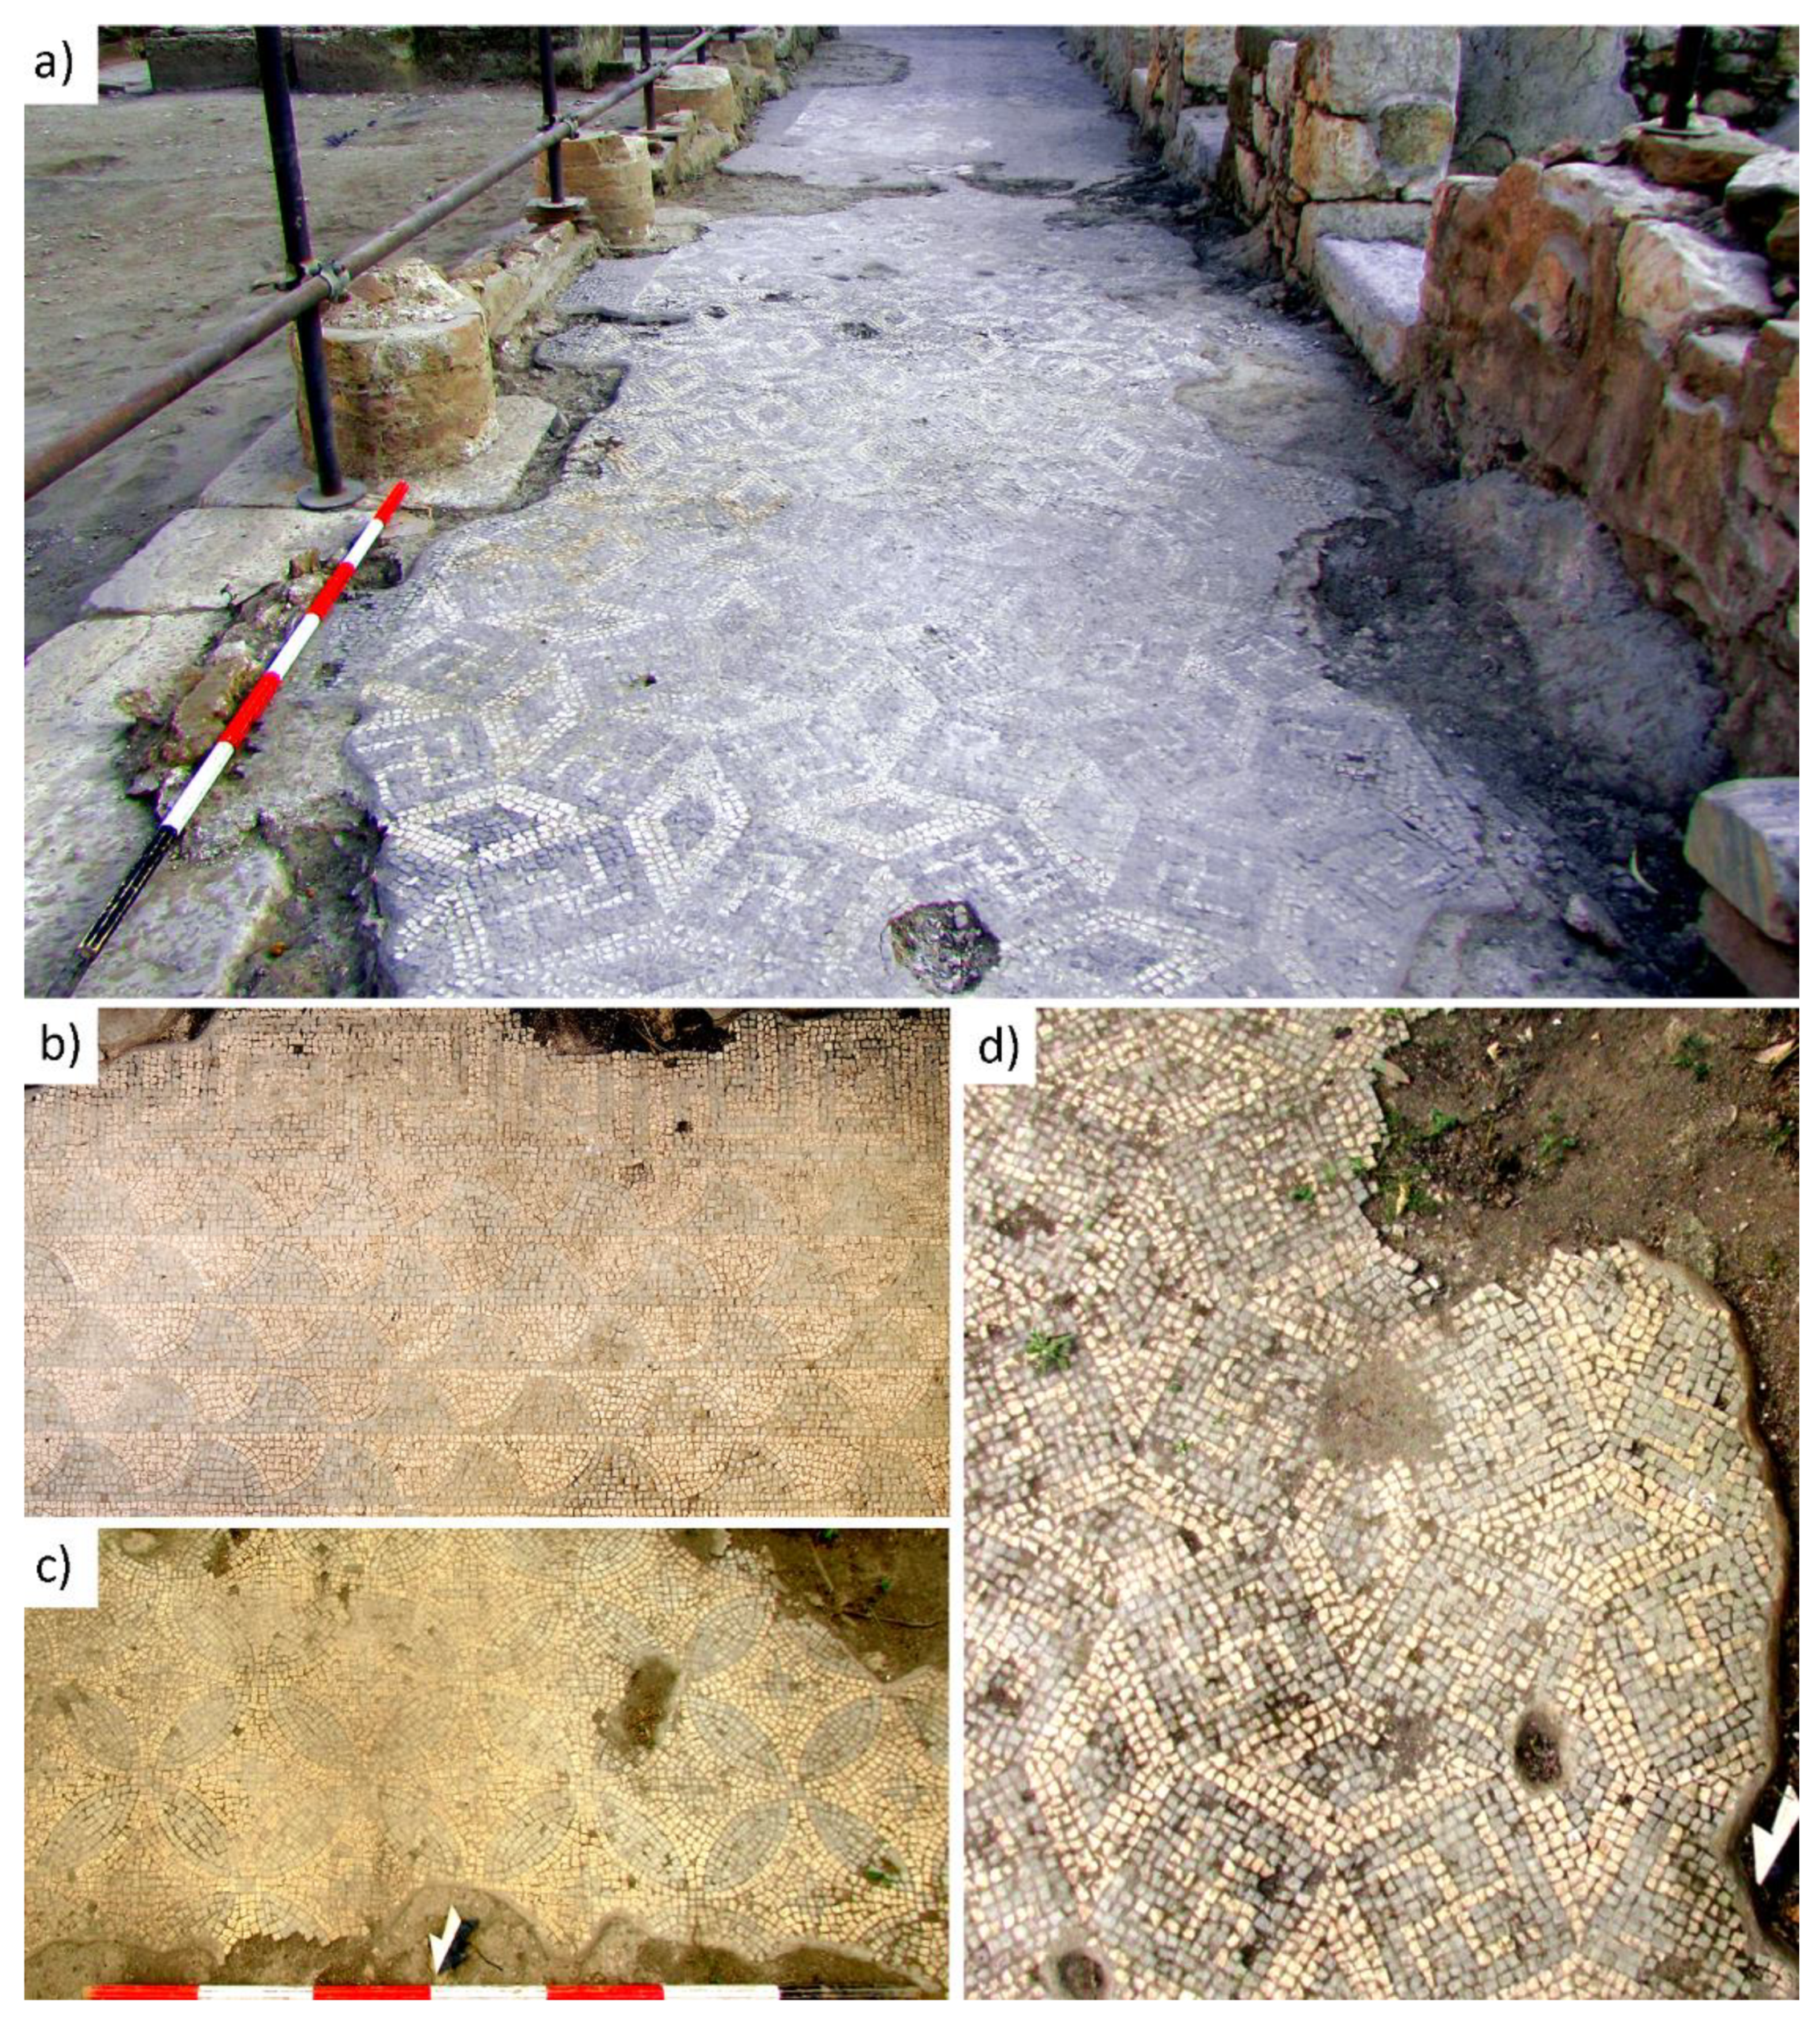 Crystals | Free Full-Text | Non-Invasive Approach to Investigate the  Mineralogy and Production Technology of the Mosaic Tesserae from the Roman  Domus of Villa San Pancrazio (Taormina, Italy)